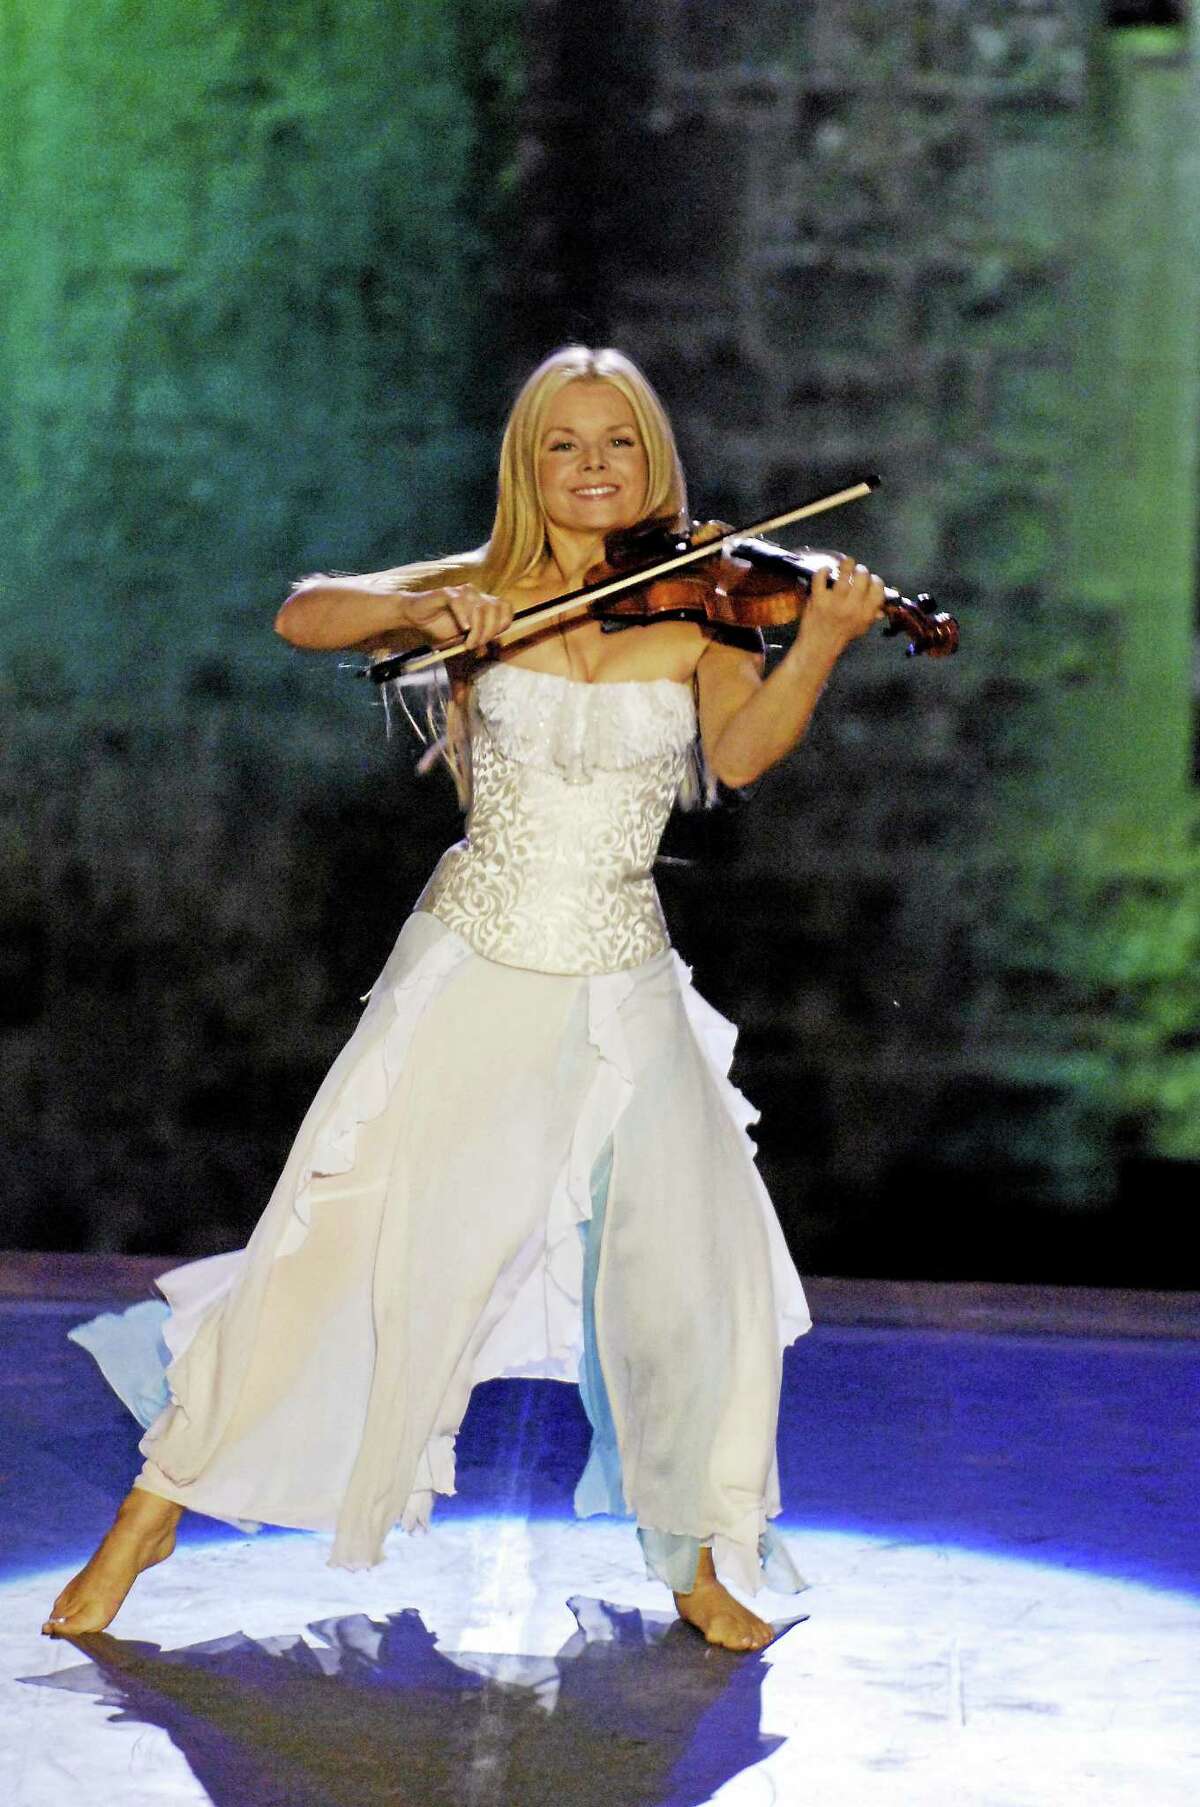 According to Mairead Nesbitt, Celtic Woman, now on its 10th anniversary tour, was supposed to be a one-night-only show in Dublin.